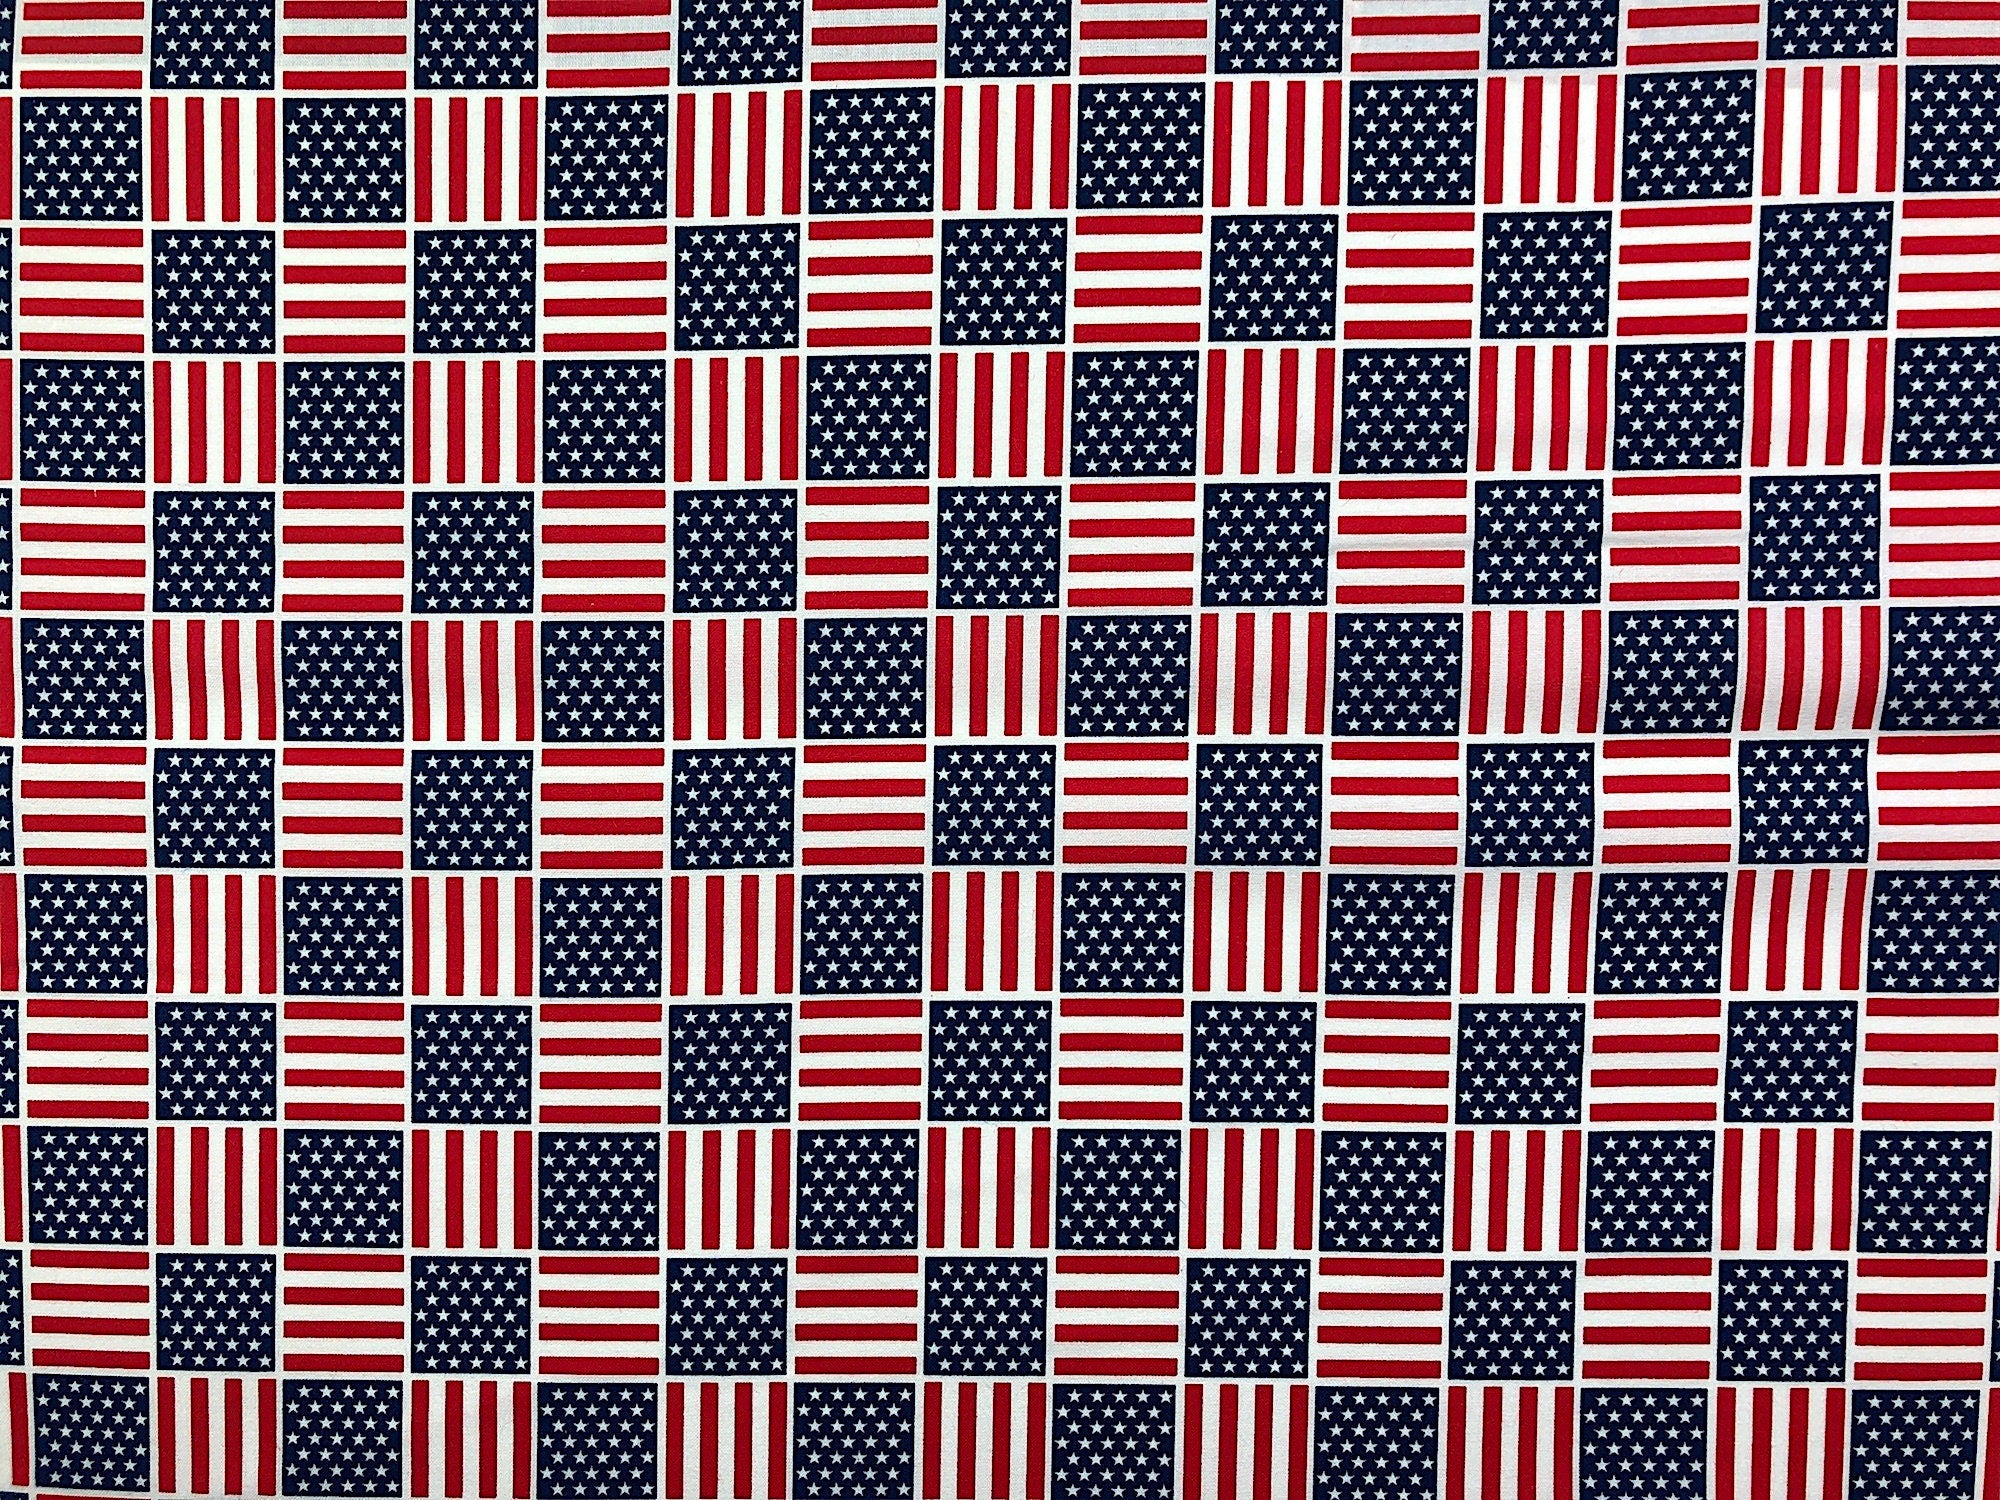 This fabric is covered with flags arranged in a checkered pattern.